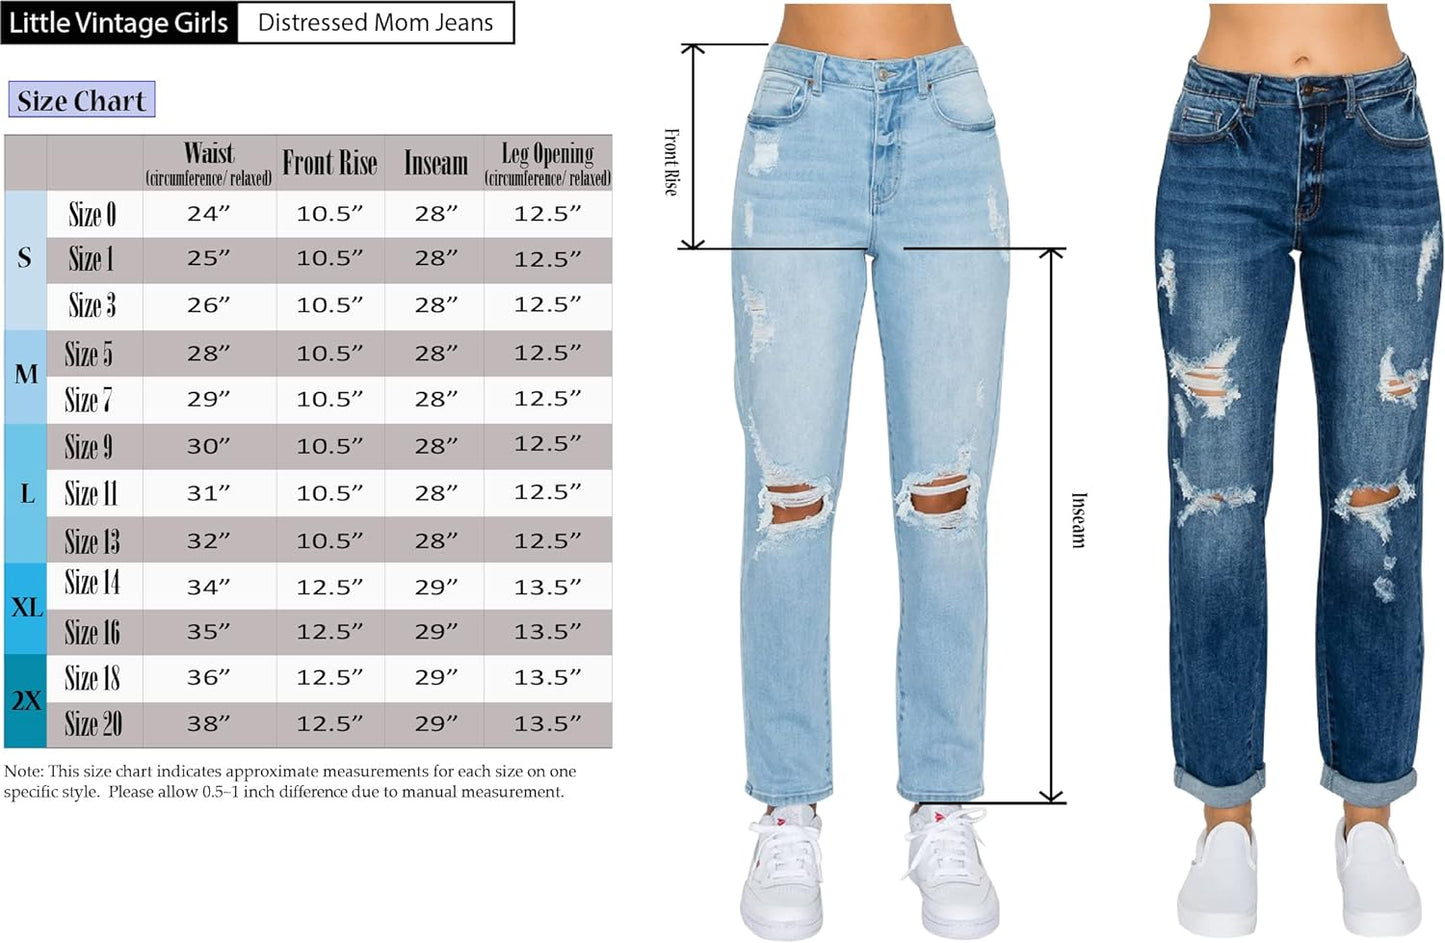 "Ultimate Comfort and Style: Women'S High Waisted Mom Jeans - Trendy Baggy Fit, Distressed Boyfriend Look, and Wide Range of Sizes!"